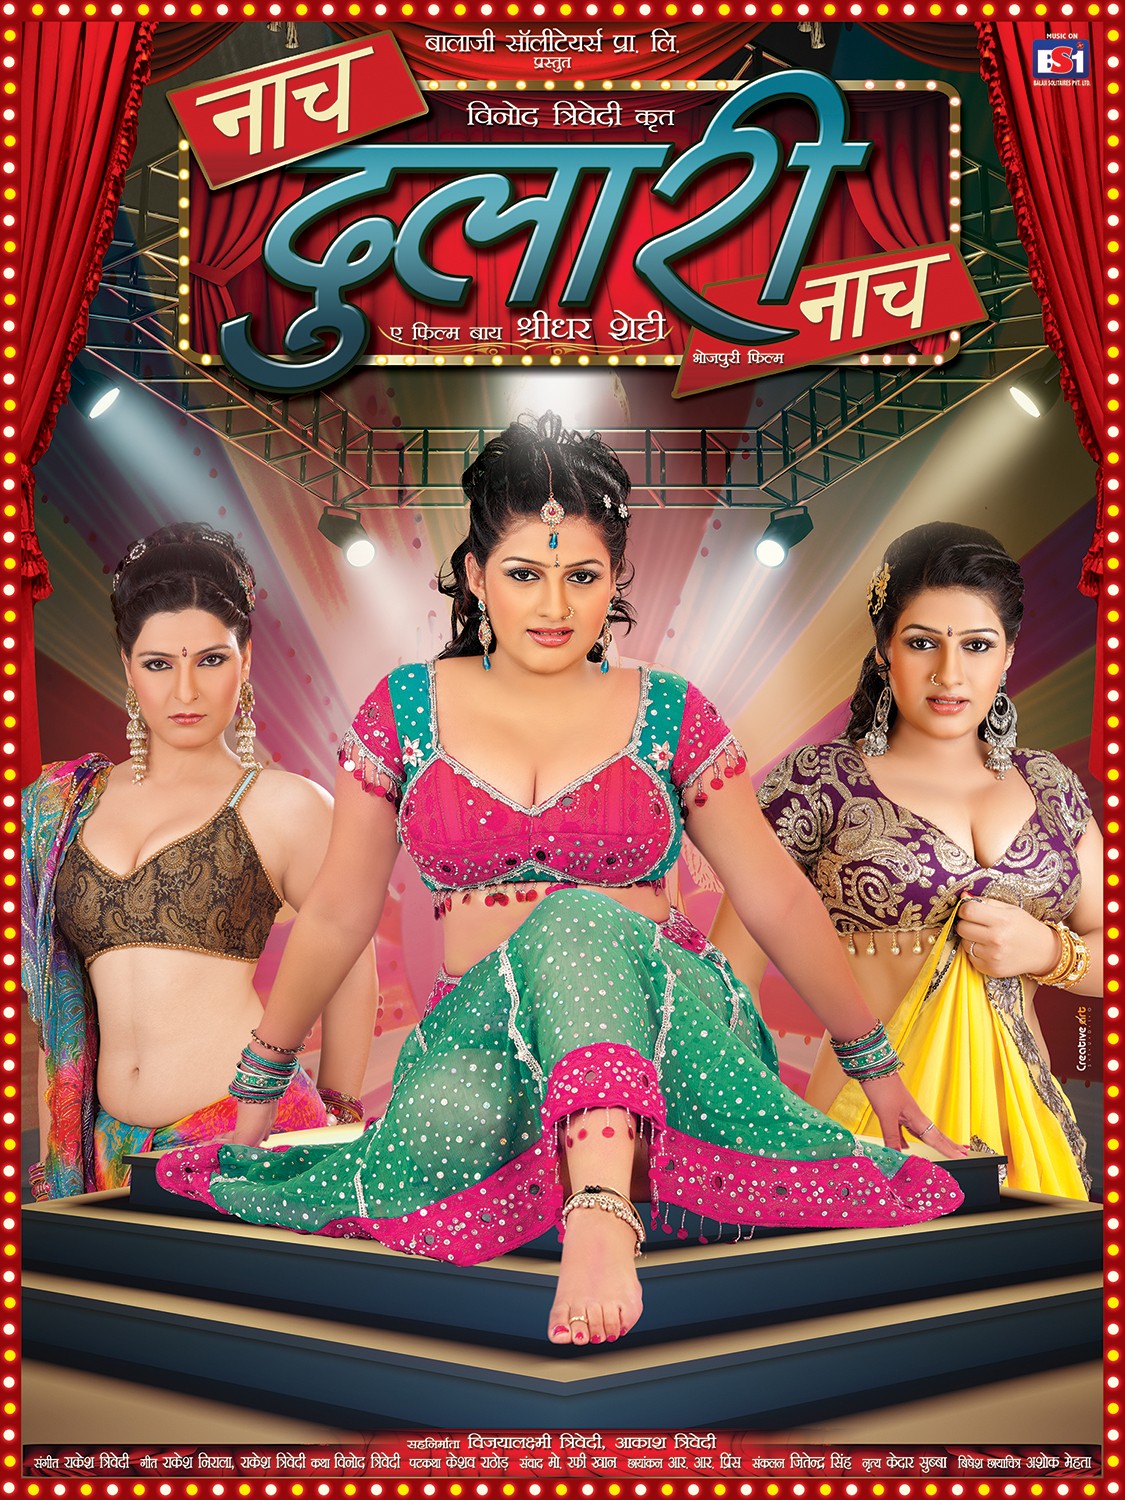 Extra Large Movie Poster Image for Naach Dulari Naach (#1 of 4)